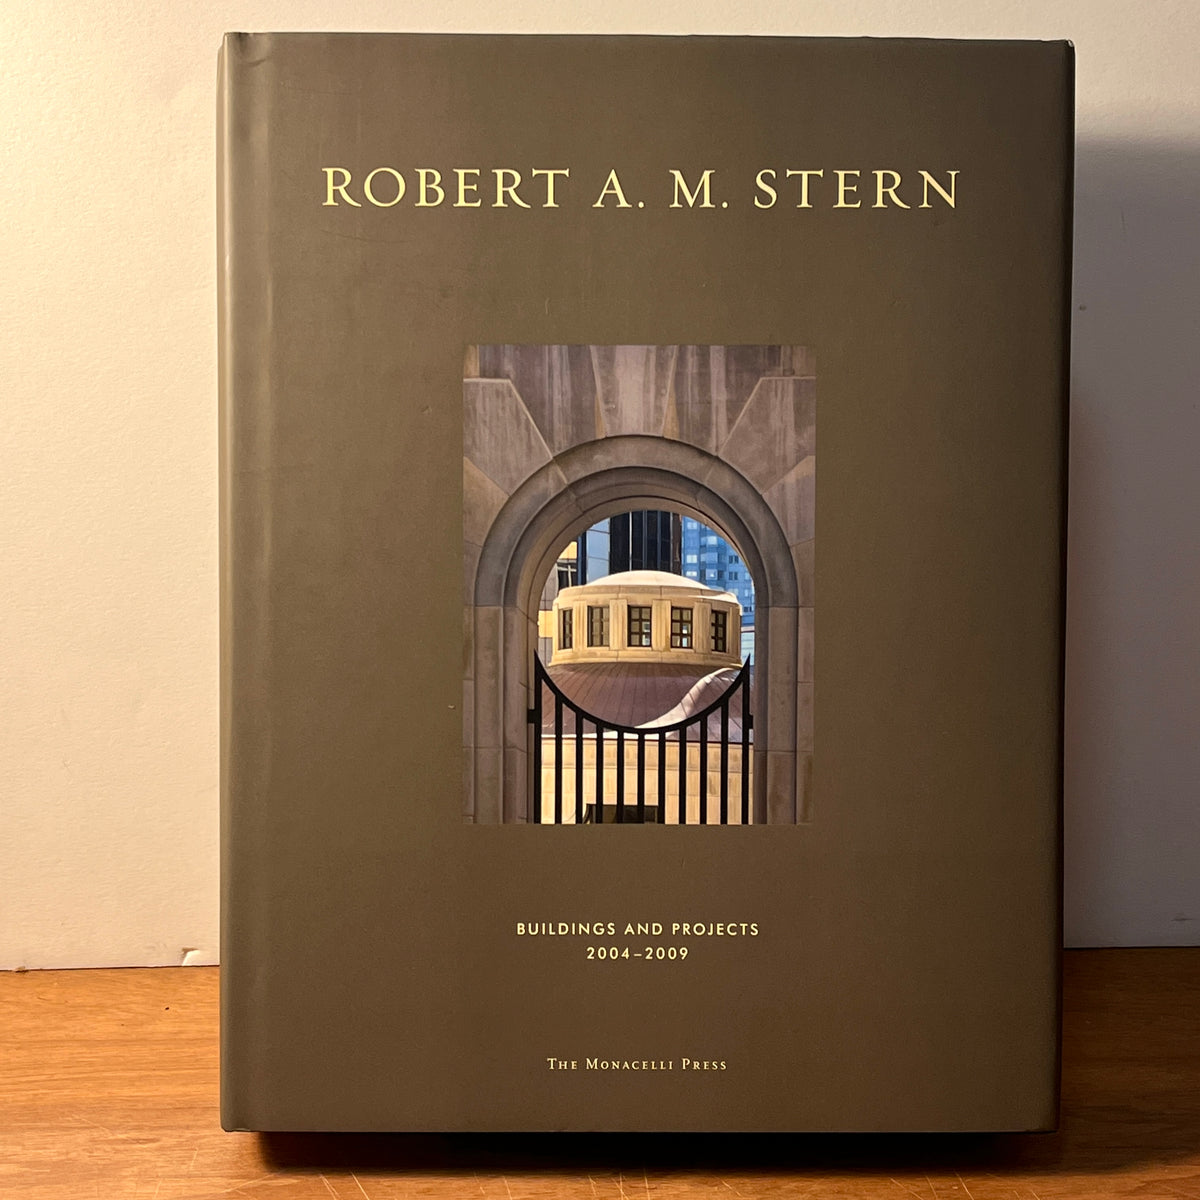 Robert A. M. Stern, Buildings and Projects 2004-2009, Peter Morris Dixon, 2009, HC, NF